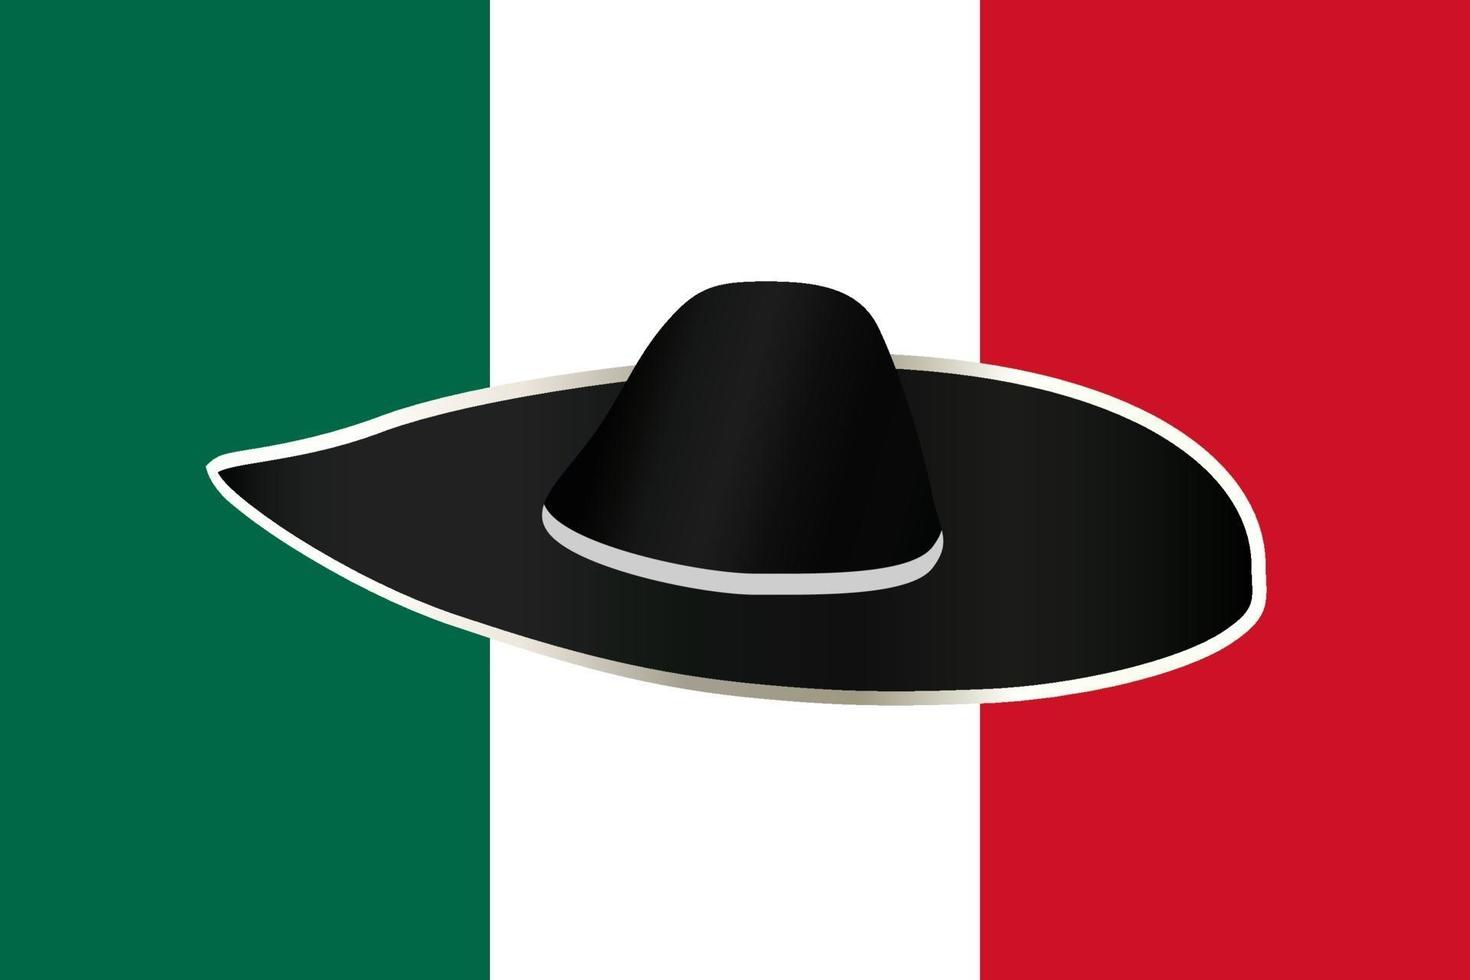 Sombrero on the background of the Mexican flag. Vector illustration on the theme of tourism, customs, national dress.